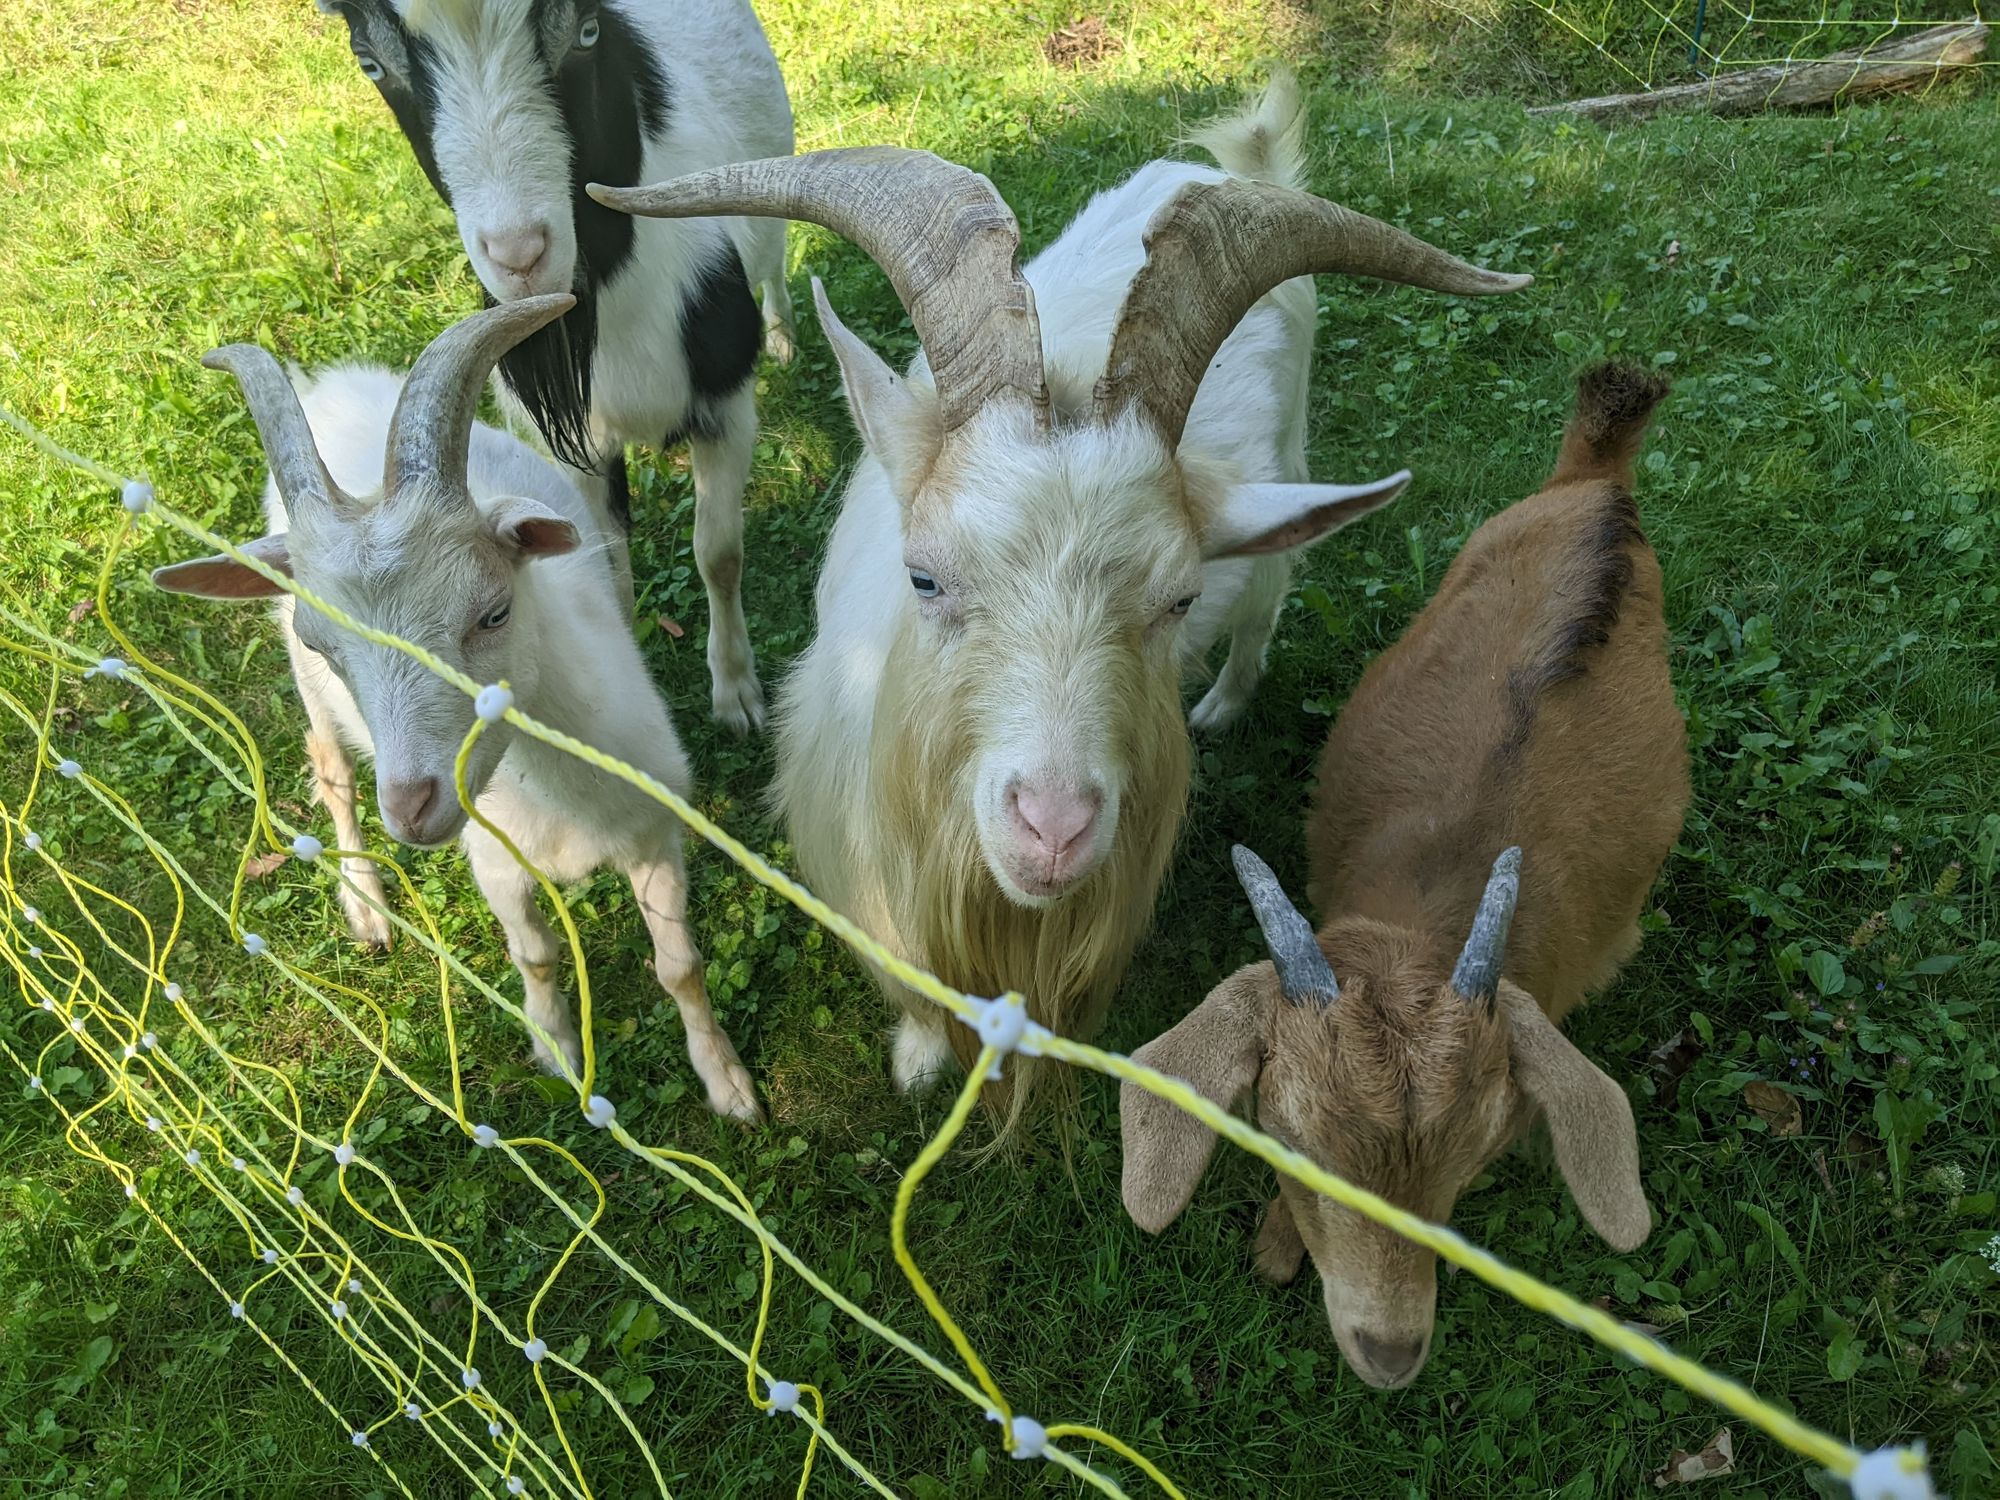 Get your goats here